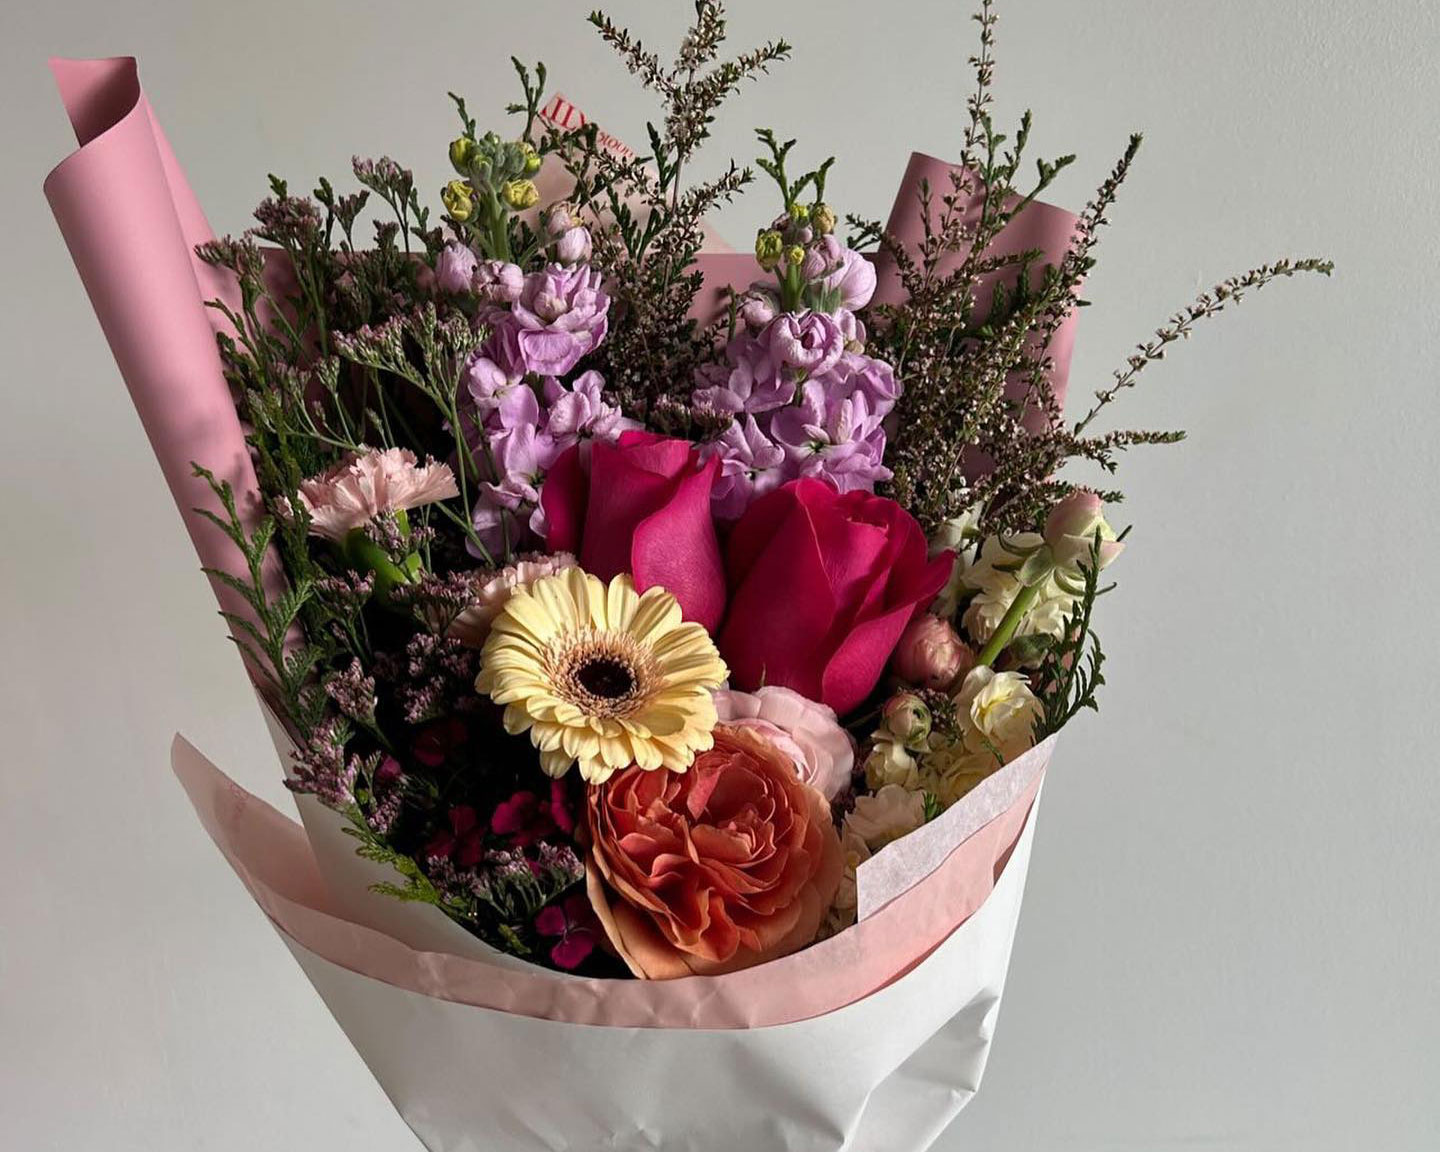 Flower delivery Sydney - daily blooms